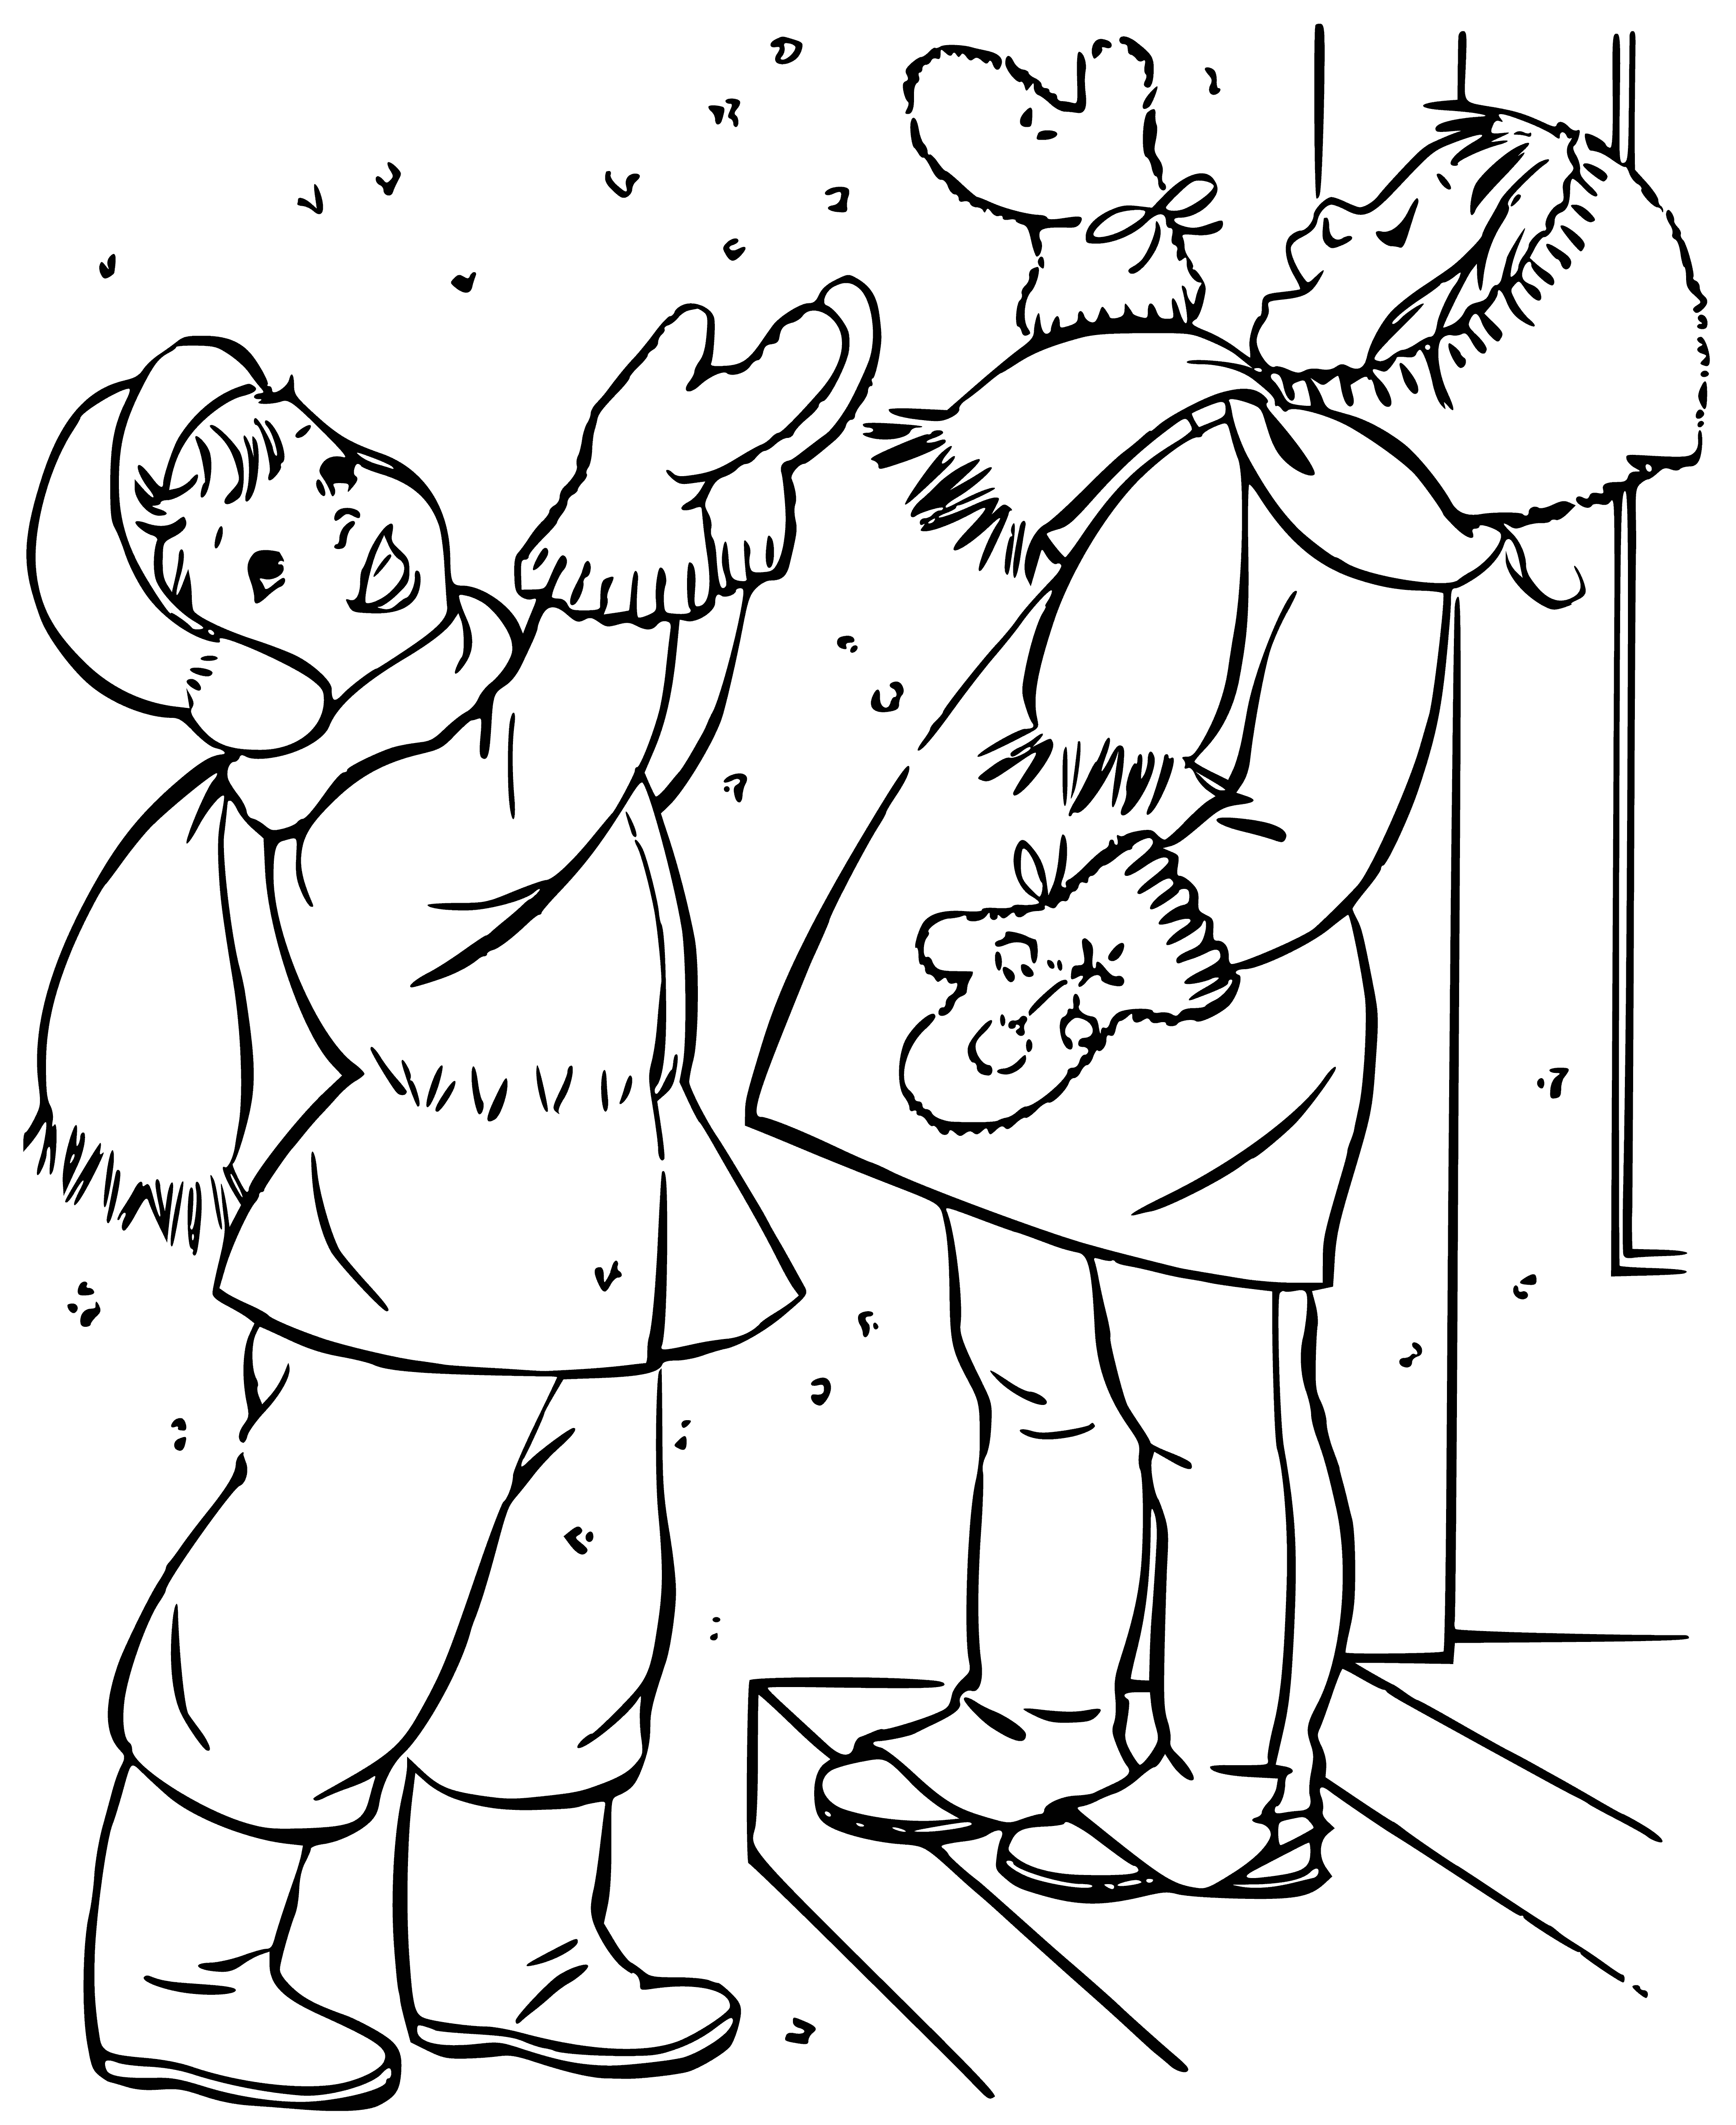 Children catch snowflakes coloring page